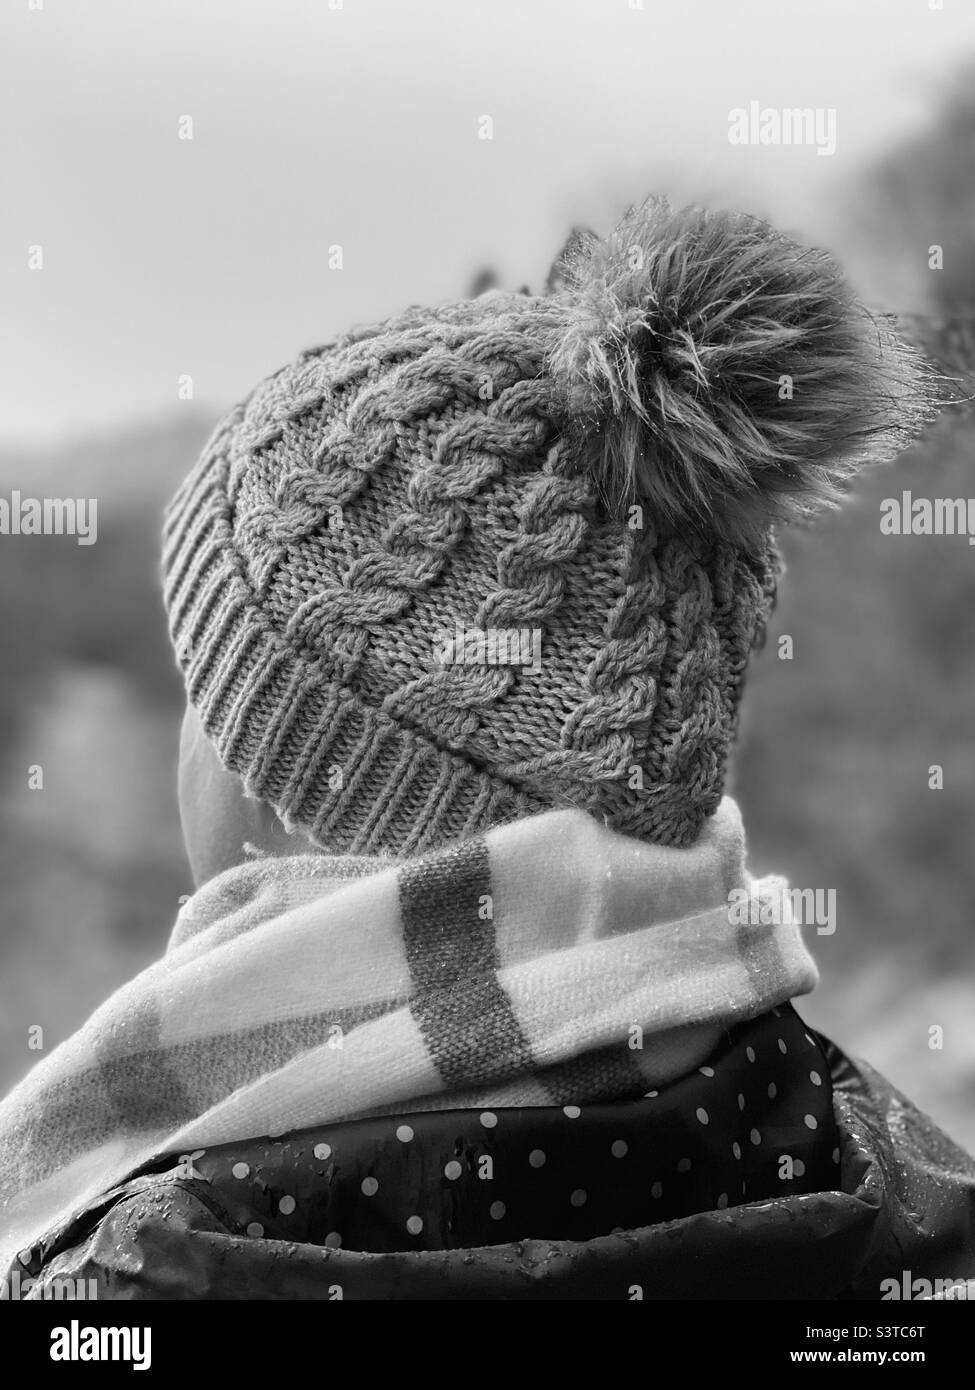 Rear view of woman wearing a knit hat and scarf Stock Photo